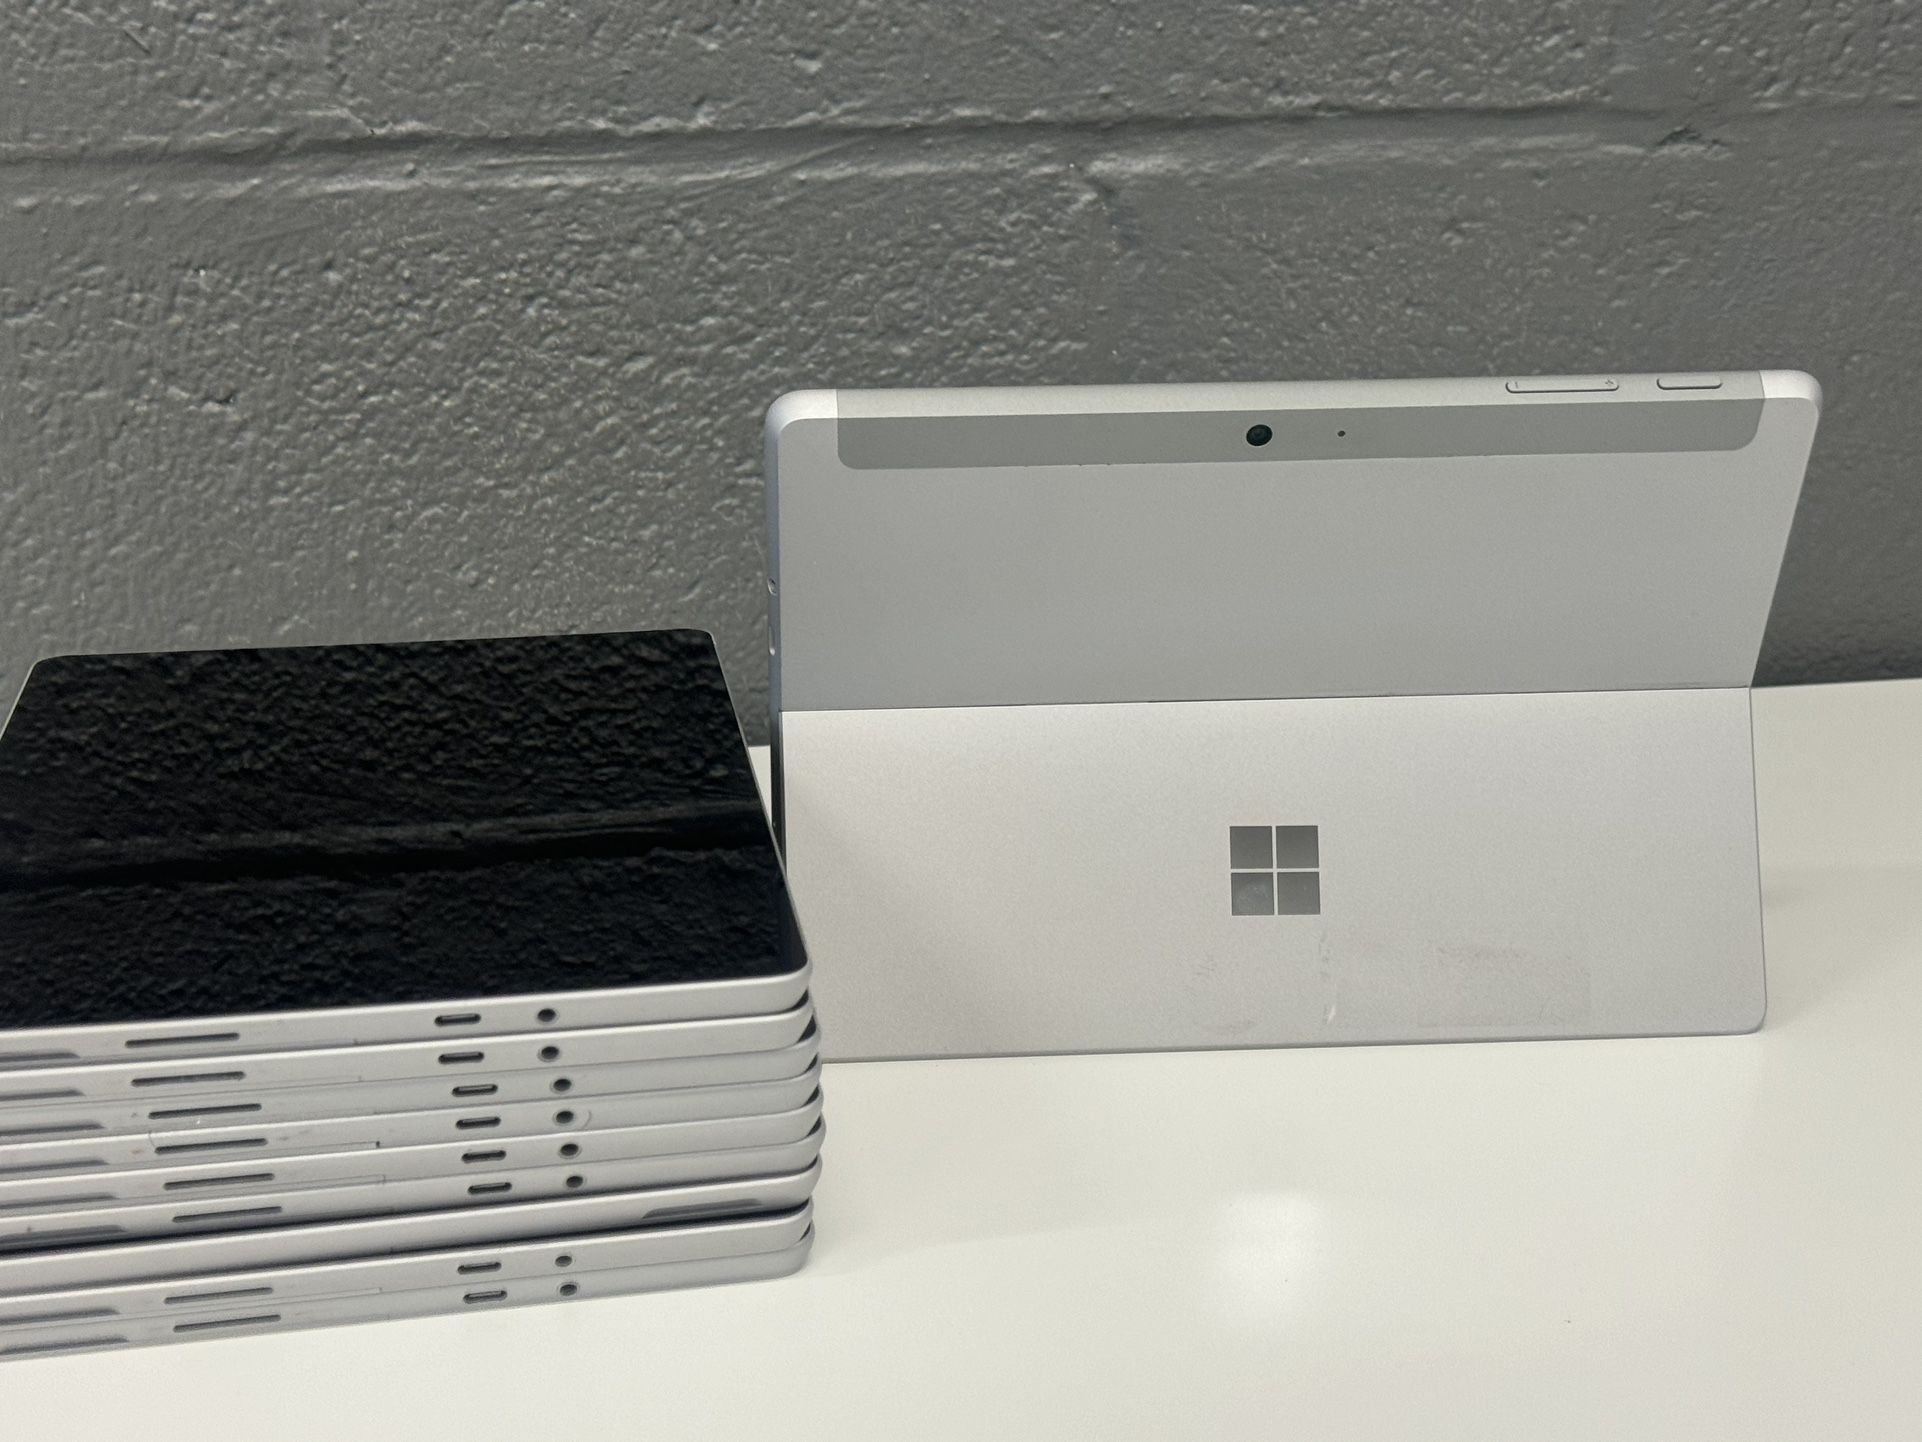 10 Microsoft Surface go 2 No charger no keybaord for $600, they have 64gb hard drive 4gb ram they are Core i5. They don’t have operating system at the